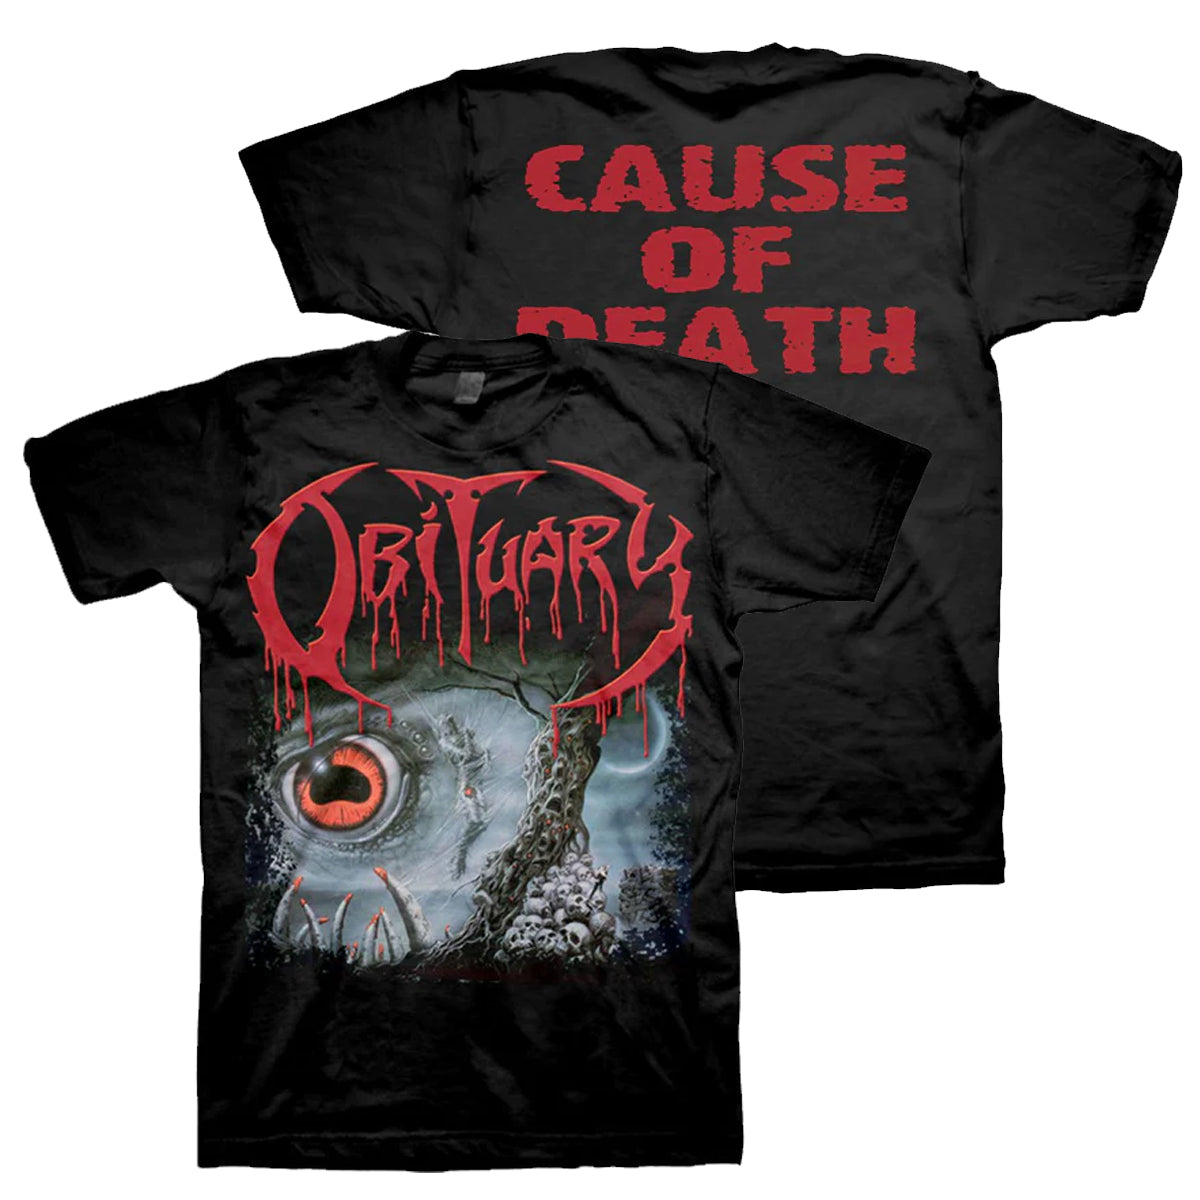 Cause of Death T-shirt